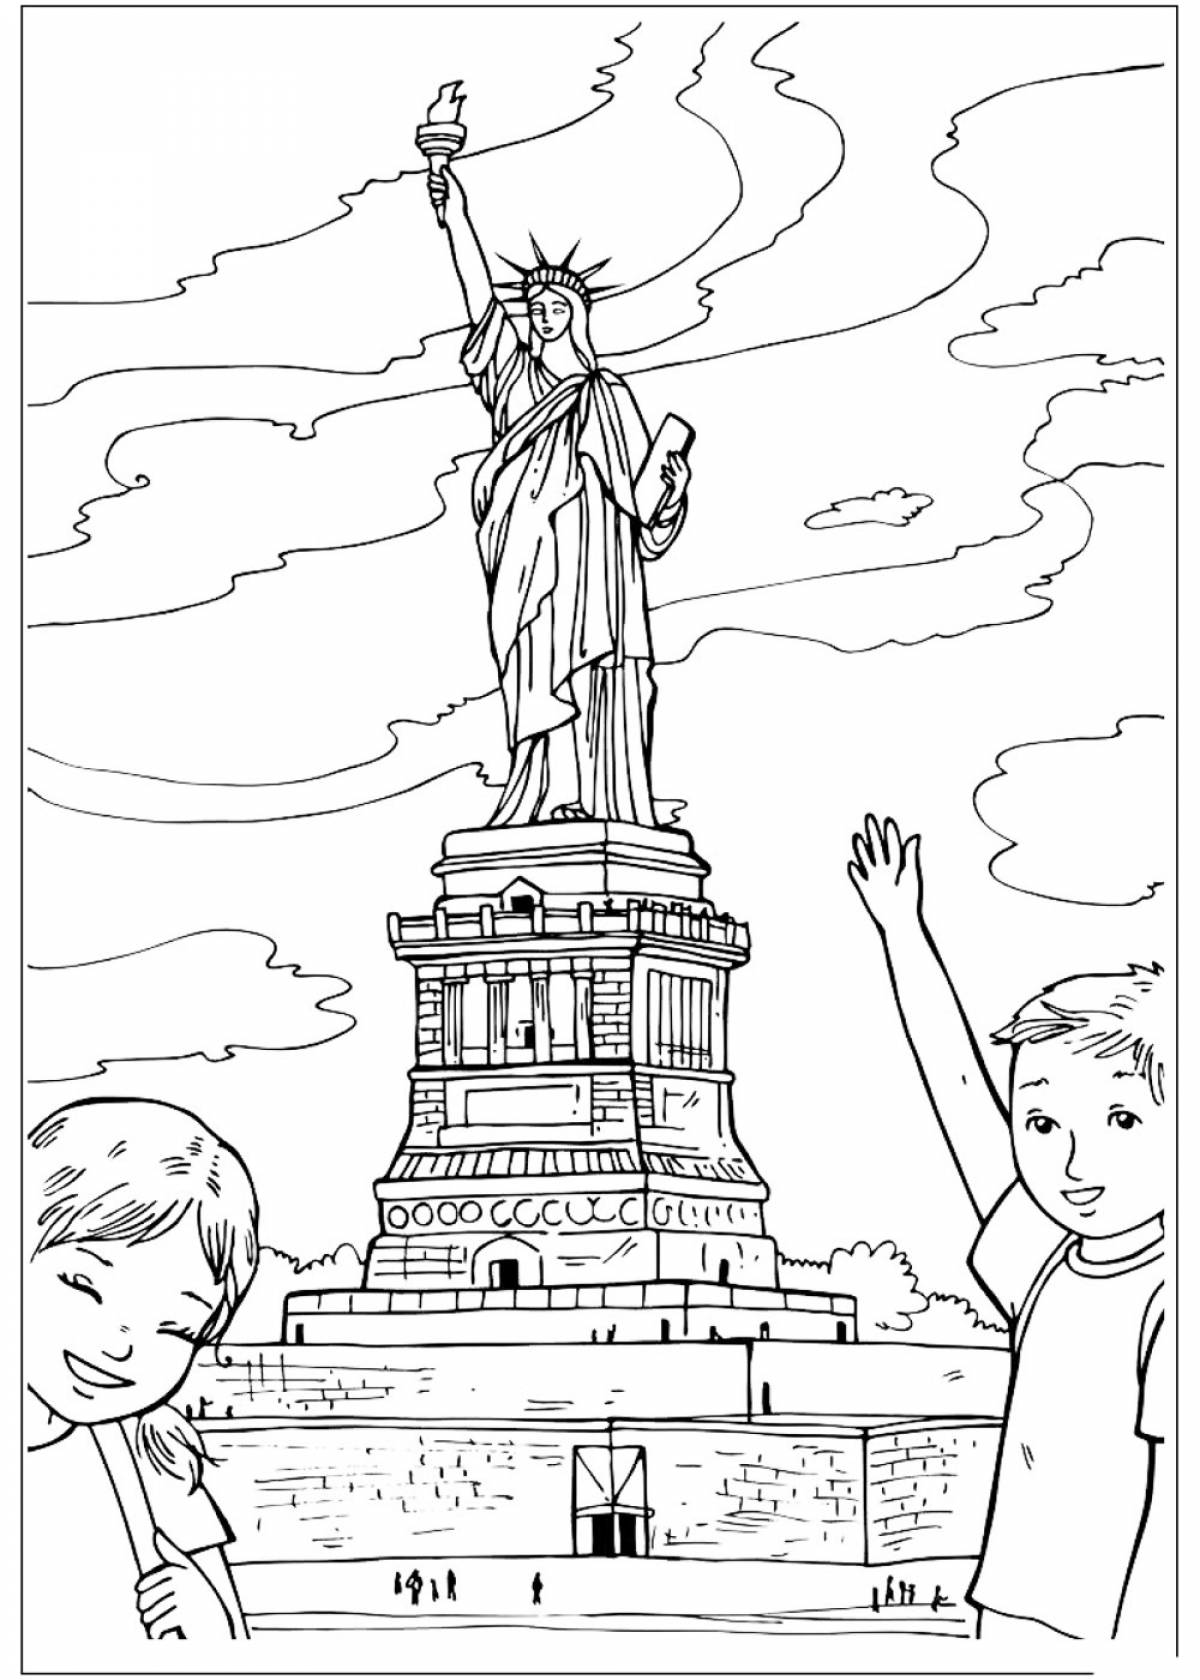 Children at the Statue of Liberty